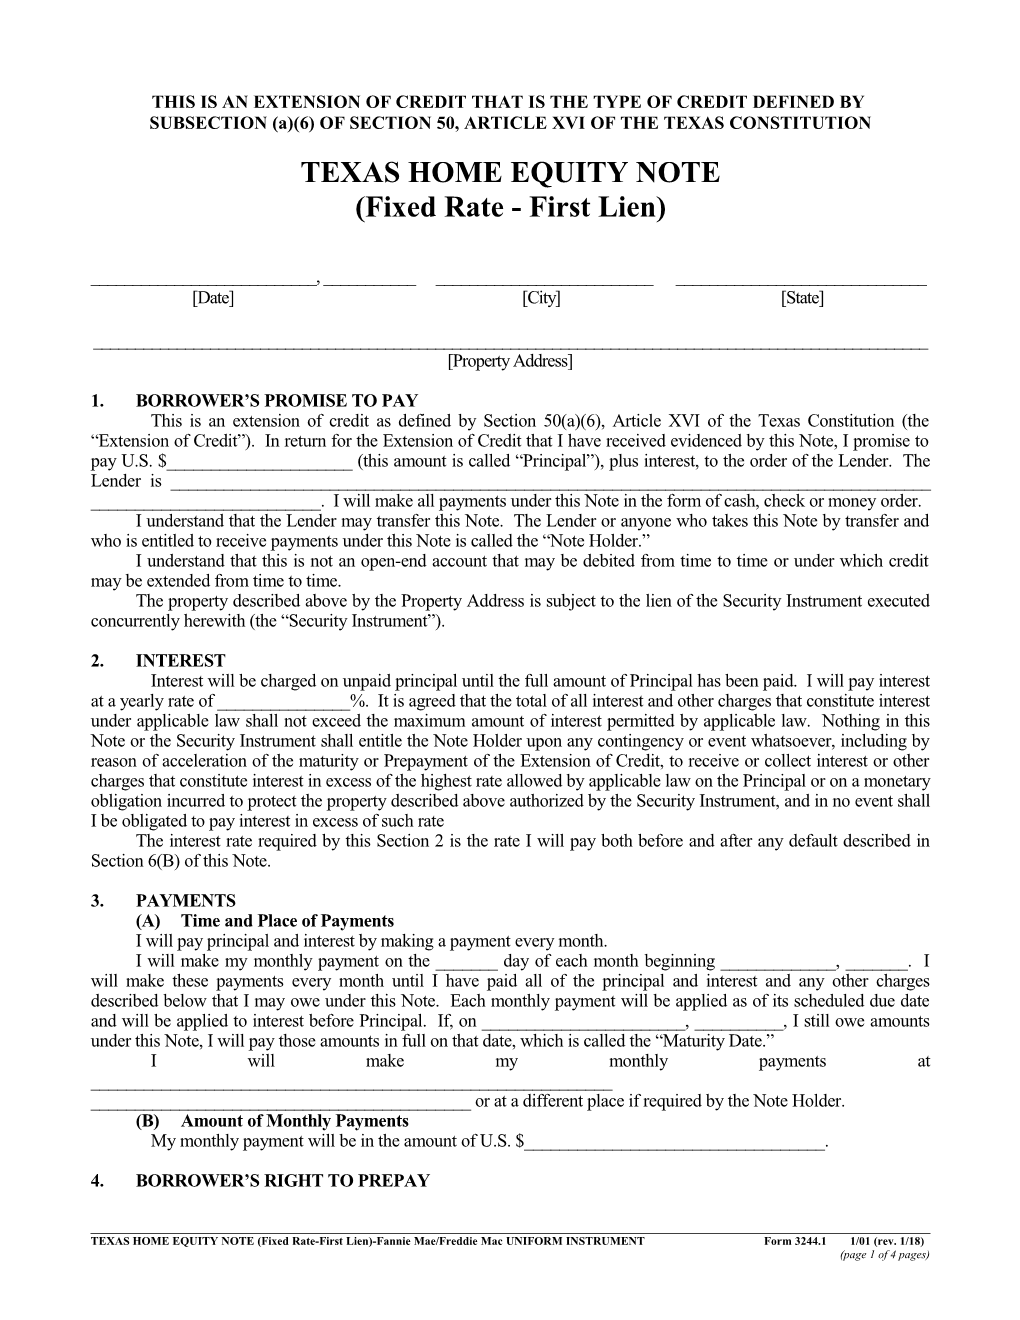 Summary: Texas Home Equity Note - Fixed Rate - First Lien (Form: 3244.1): Word